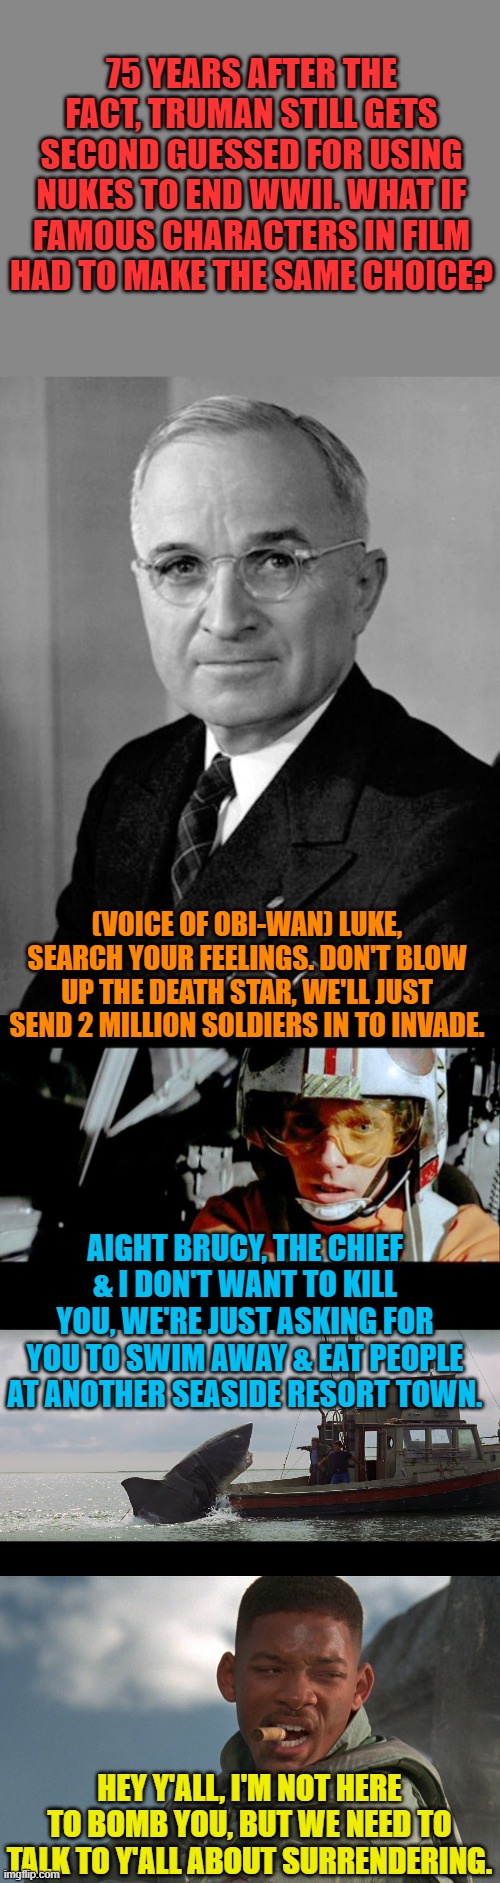 Not likely, but what if? | 75 YEARS AFTER THE FACT, TRUMAN STILL GETS SECOND GUESSED FOR USING NUKES TO END WWII. WHAT IF FAMOUS CHARACTERS IN FILM HAD TO MAKE THE SAME CHOICE? (VOICE OF OBI-WAN) LUKE, SEARCH YOUR FEELINGS. DON'T BLOW UP THE DEATH STAR, WE'LL JUST SEND 2 MILLION SOLDIERS IN TO INVADE. AIGHT BRUCY, THE CHIEF & I DON'T WANT TO KILL YOU, WE'RE JUST ASKING FOR YOU TO SWIM AWAY & EAT PEOPLE AT ANOTHER SEASIDE RESORT TOWN. HEY Y'ALL, I'M NOT HERE TO BOMB YOU, BUT WE NEED TO TALK TO Y'ALL ABOUT SURRENDERING. | image tagged in luke use the force,independence day,jaws boat,harry truman | made w/ Imgflip meme maker